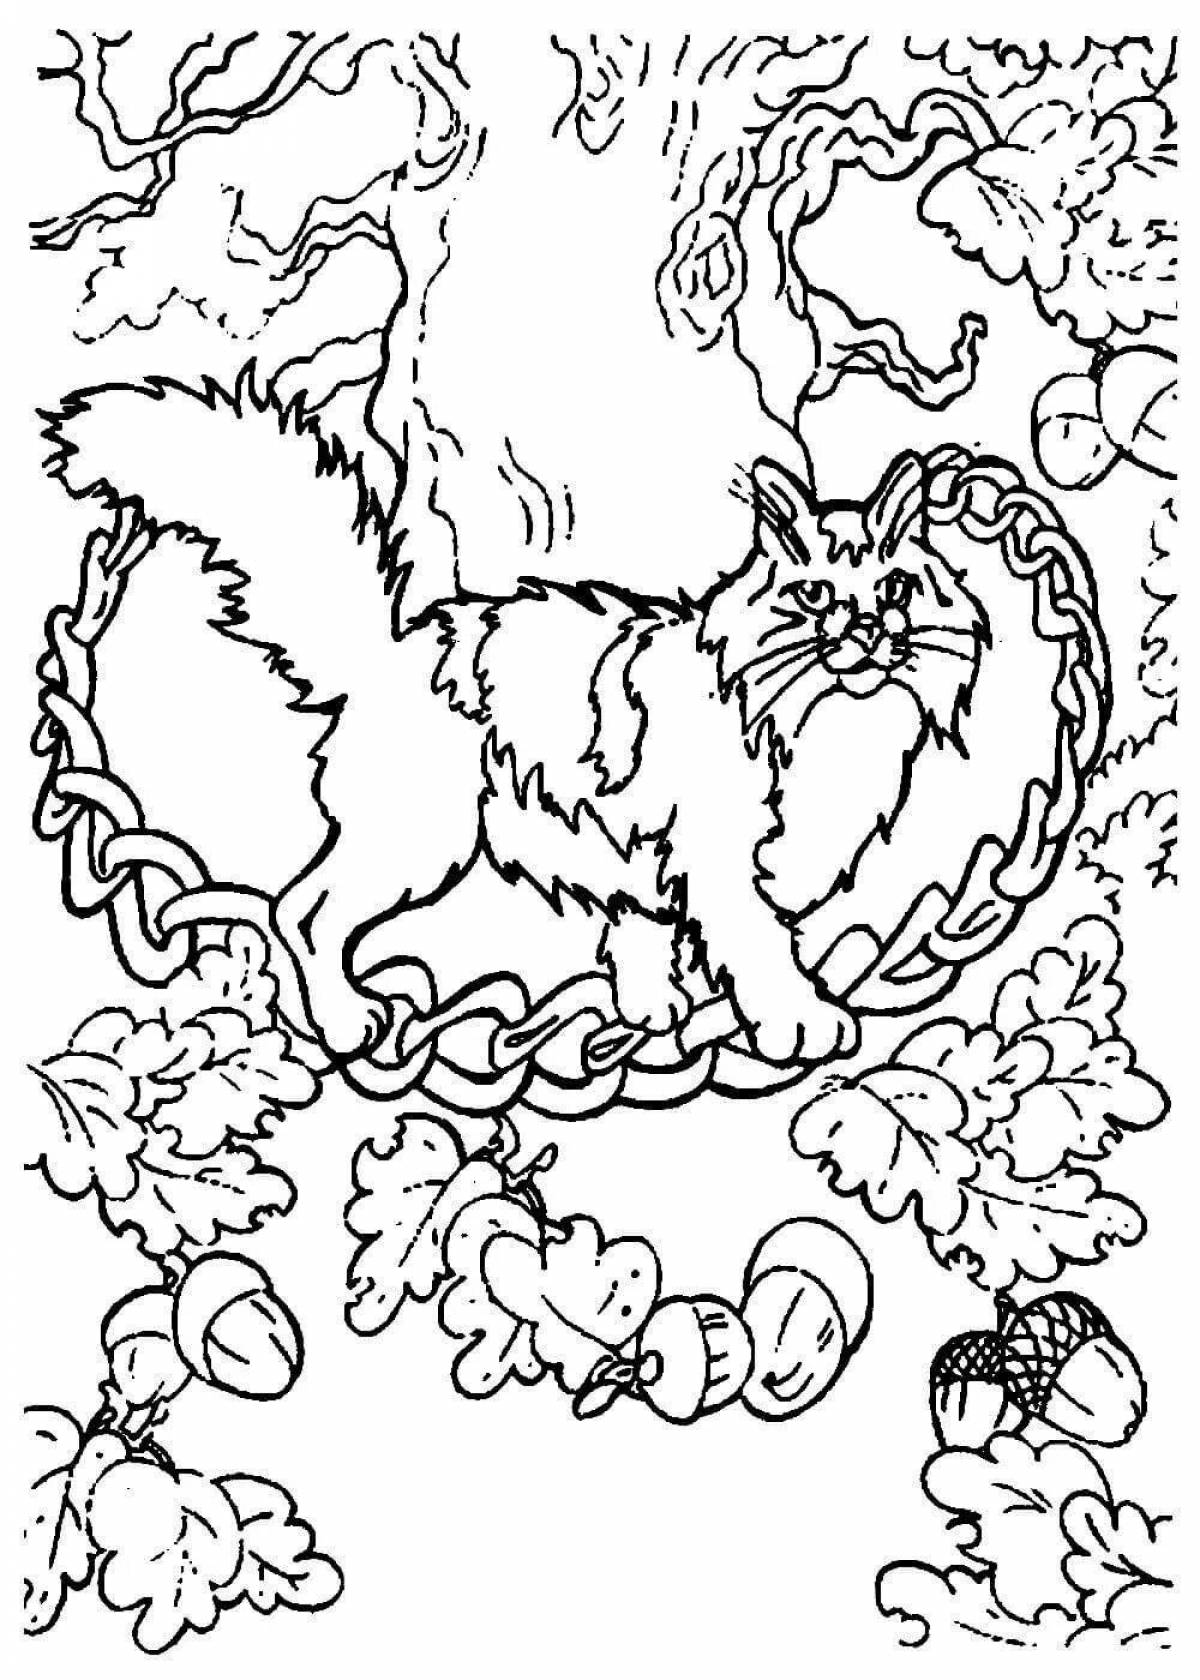 Inviting coloring book based on Pushkin's fairy tales